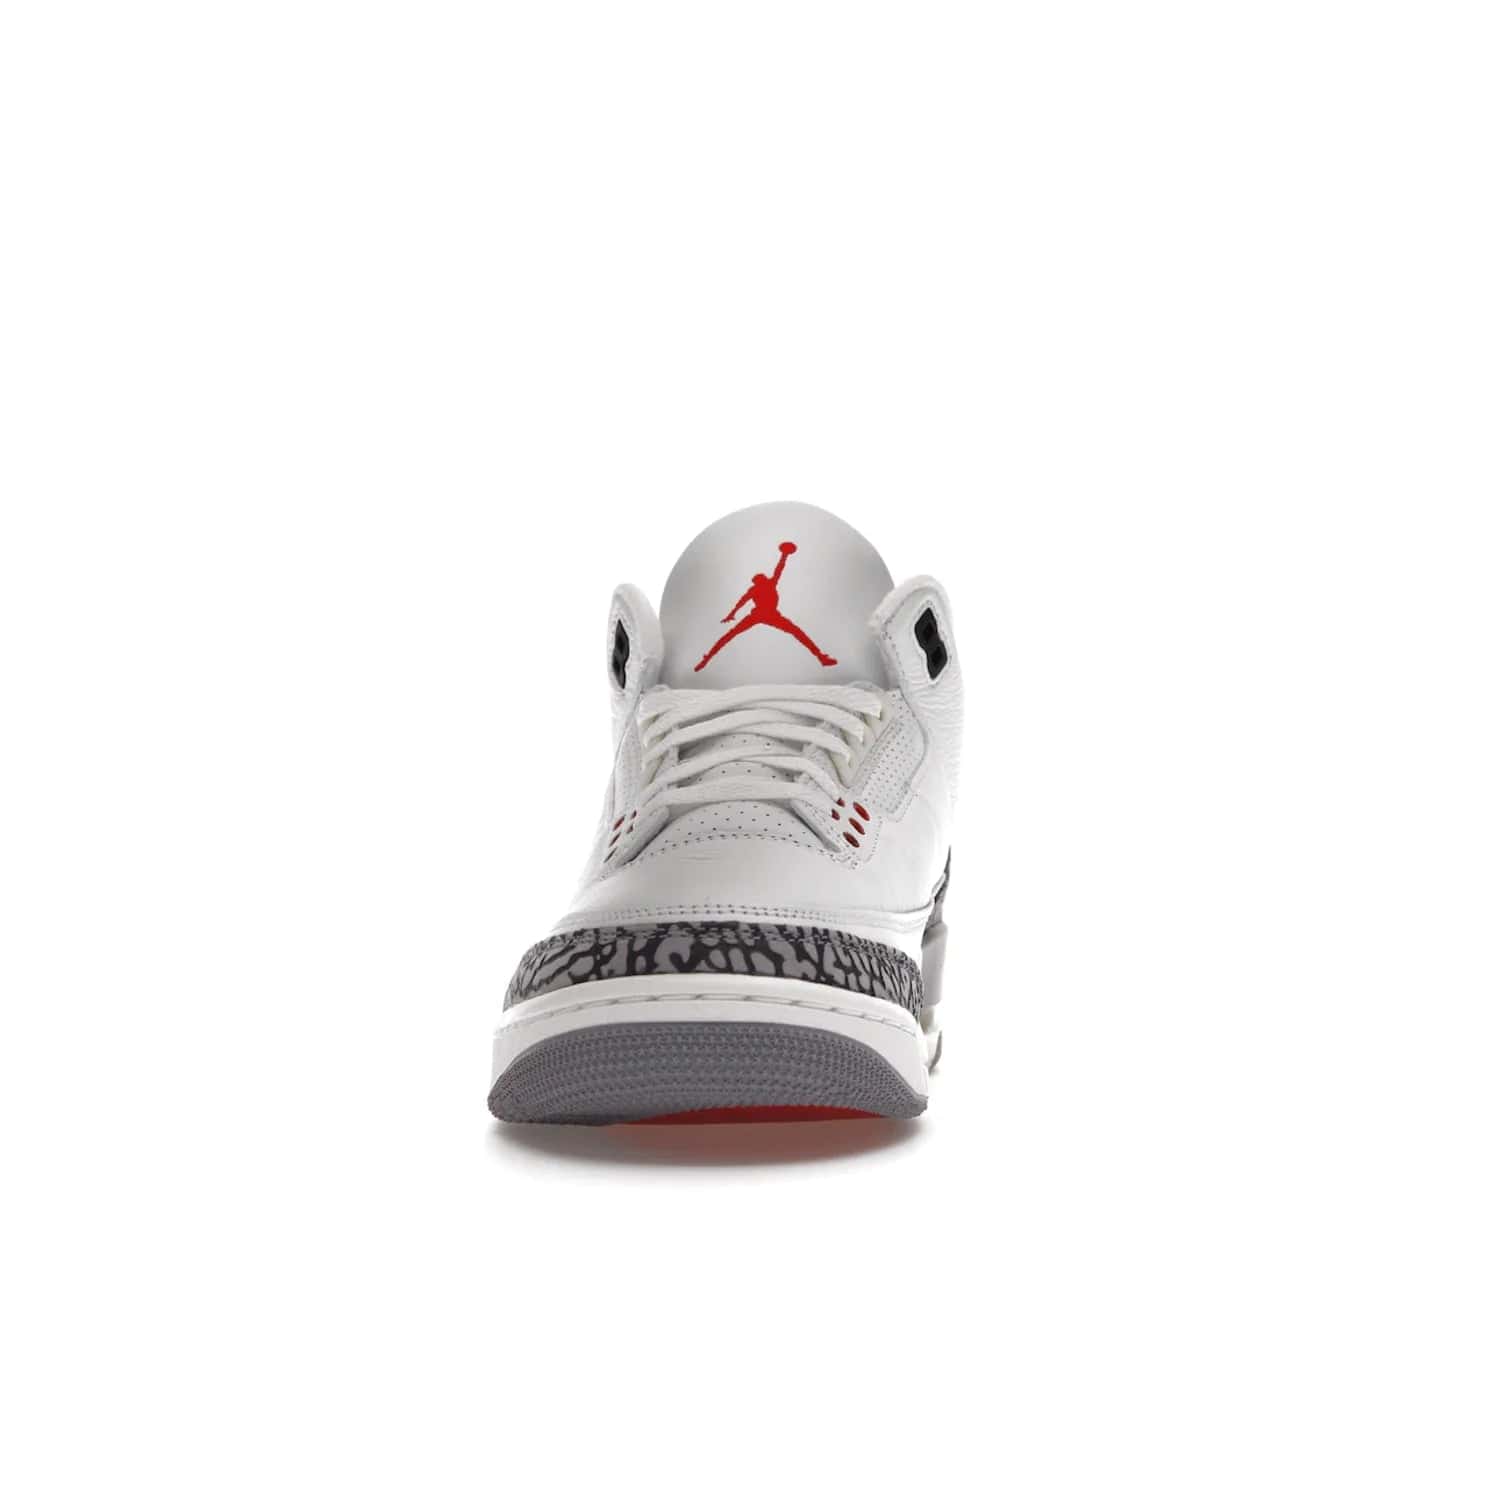 Jordan 3 Retro White Cement Reimagined - Image 11 - Only at www.BallersClubKickz.com - The Reimagined Air Jordan 3 Retro in a Summit White/Fire Red/Black/Cement Grey colorway is launching on March 11, 2023. Featuring a white leather upper, off-white midsoles and heel tabs, this vintage-look sneaker is a must-have.